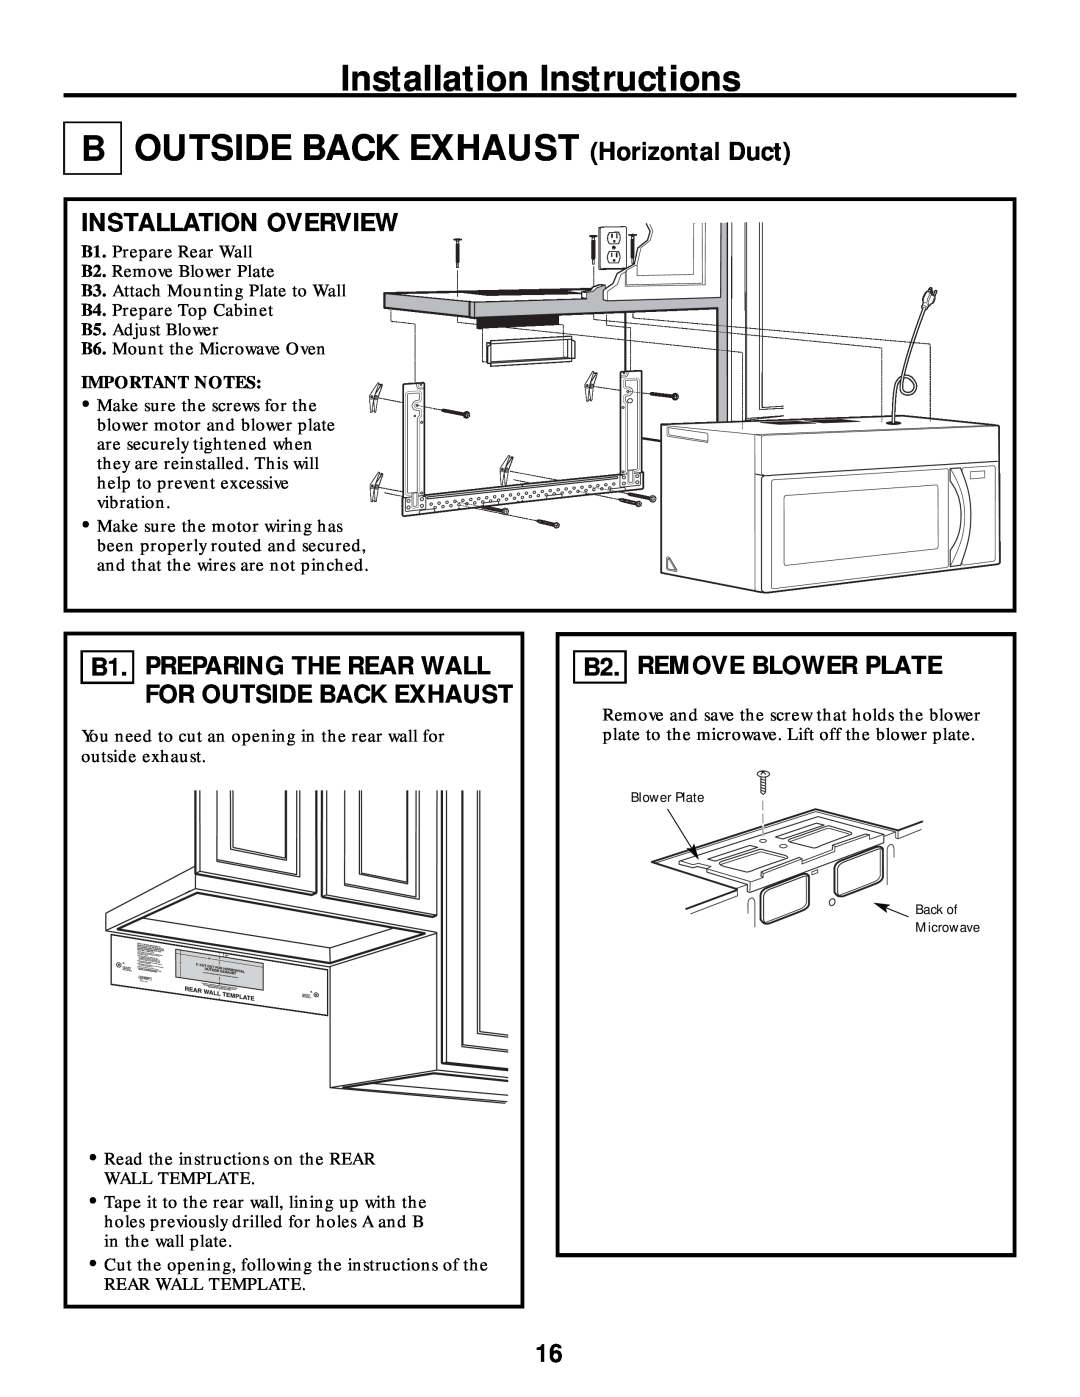 Frigidaire 316495063 warranty Installation Instructions B OUTSIDE BACK EXHAUST Horizontal Duct, B2. REMOVE BLOWER PLATE 